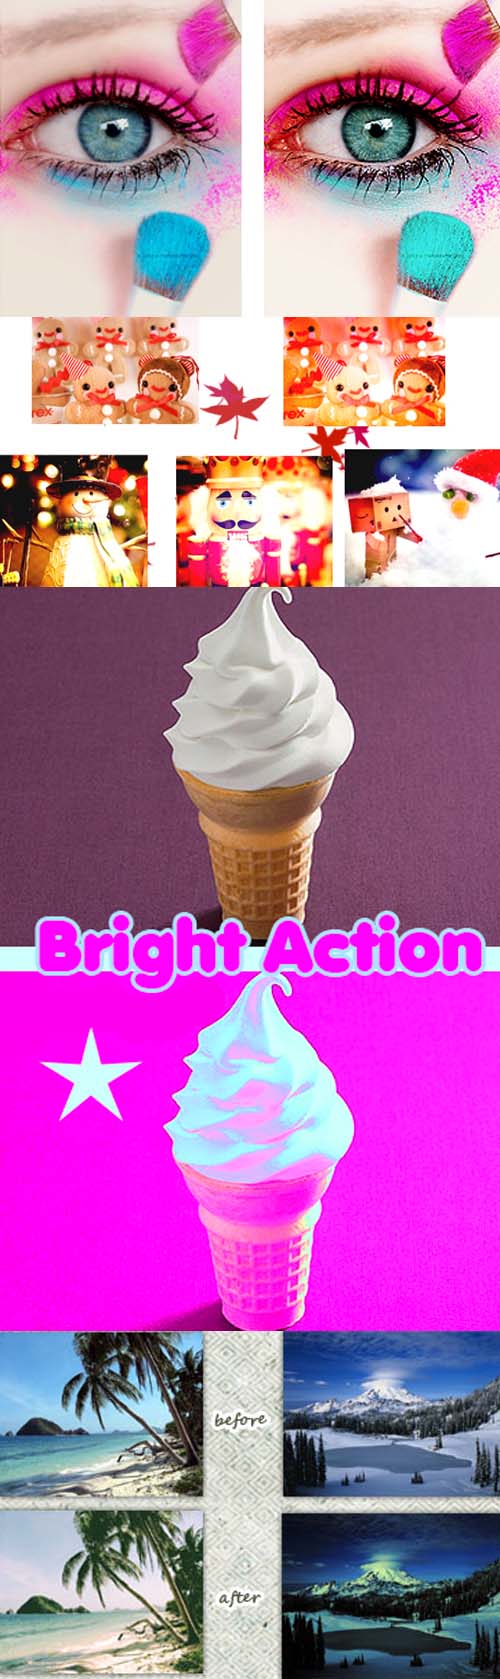 Photoshop Action 2012 pack 508